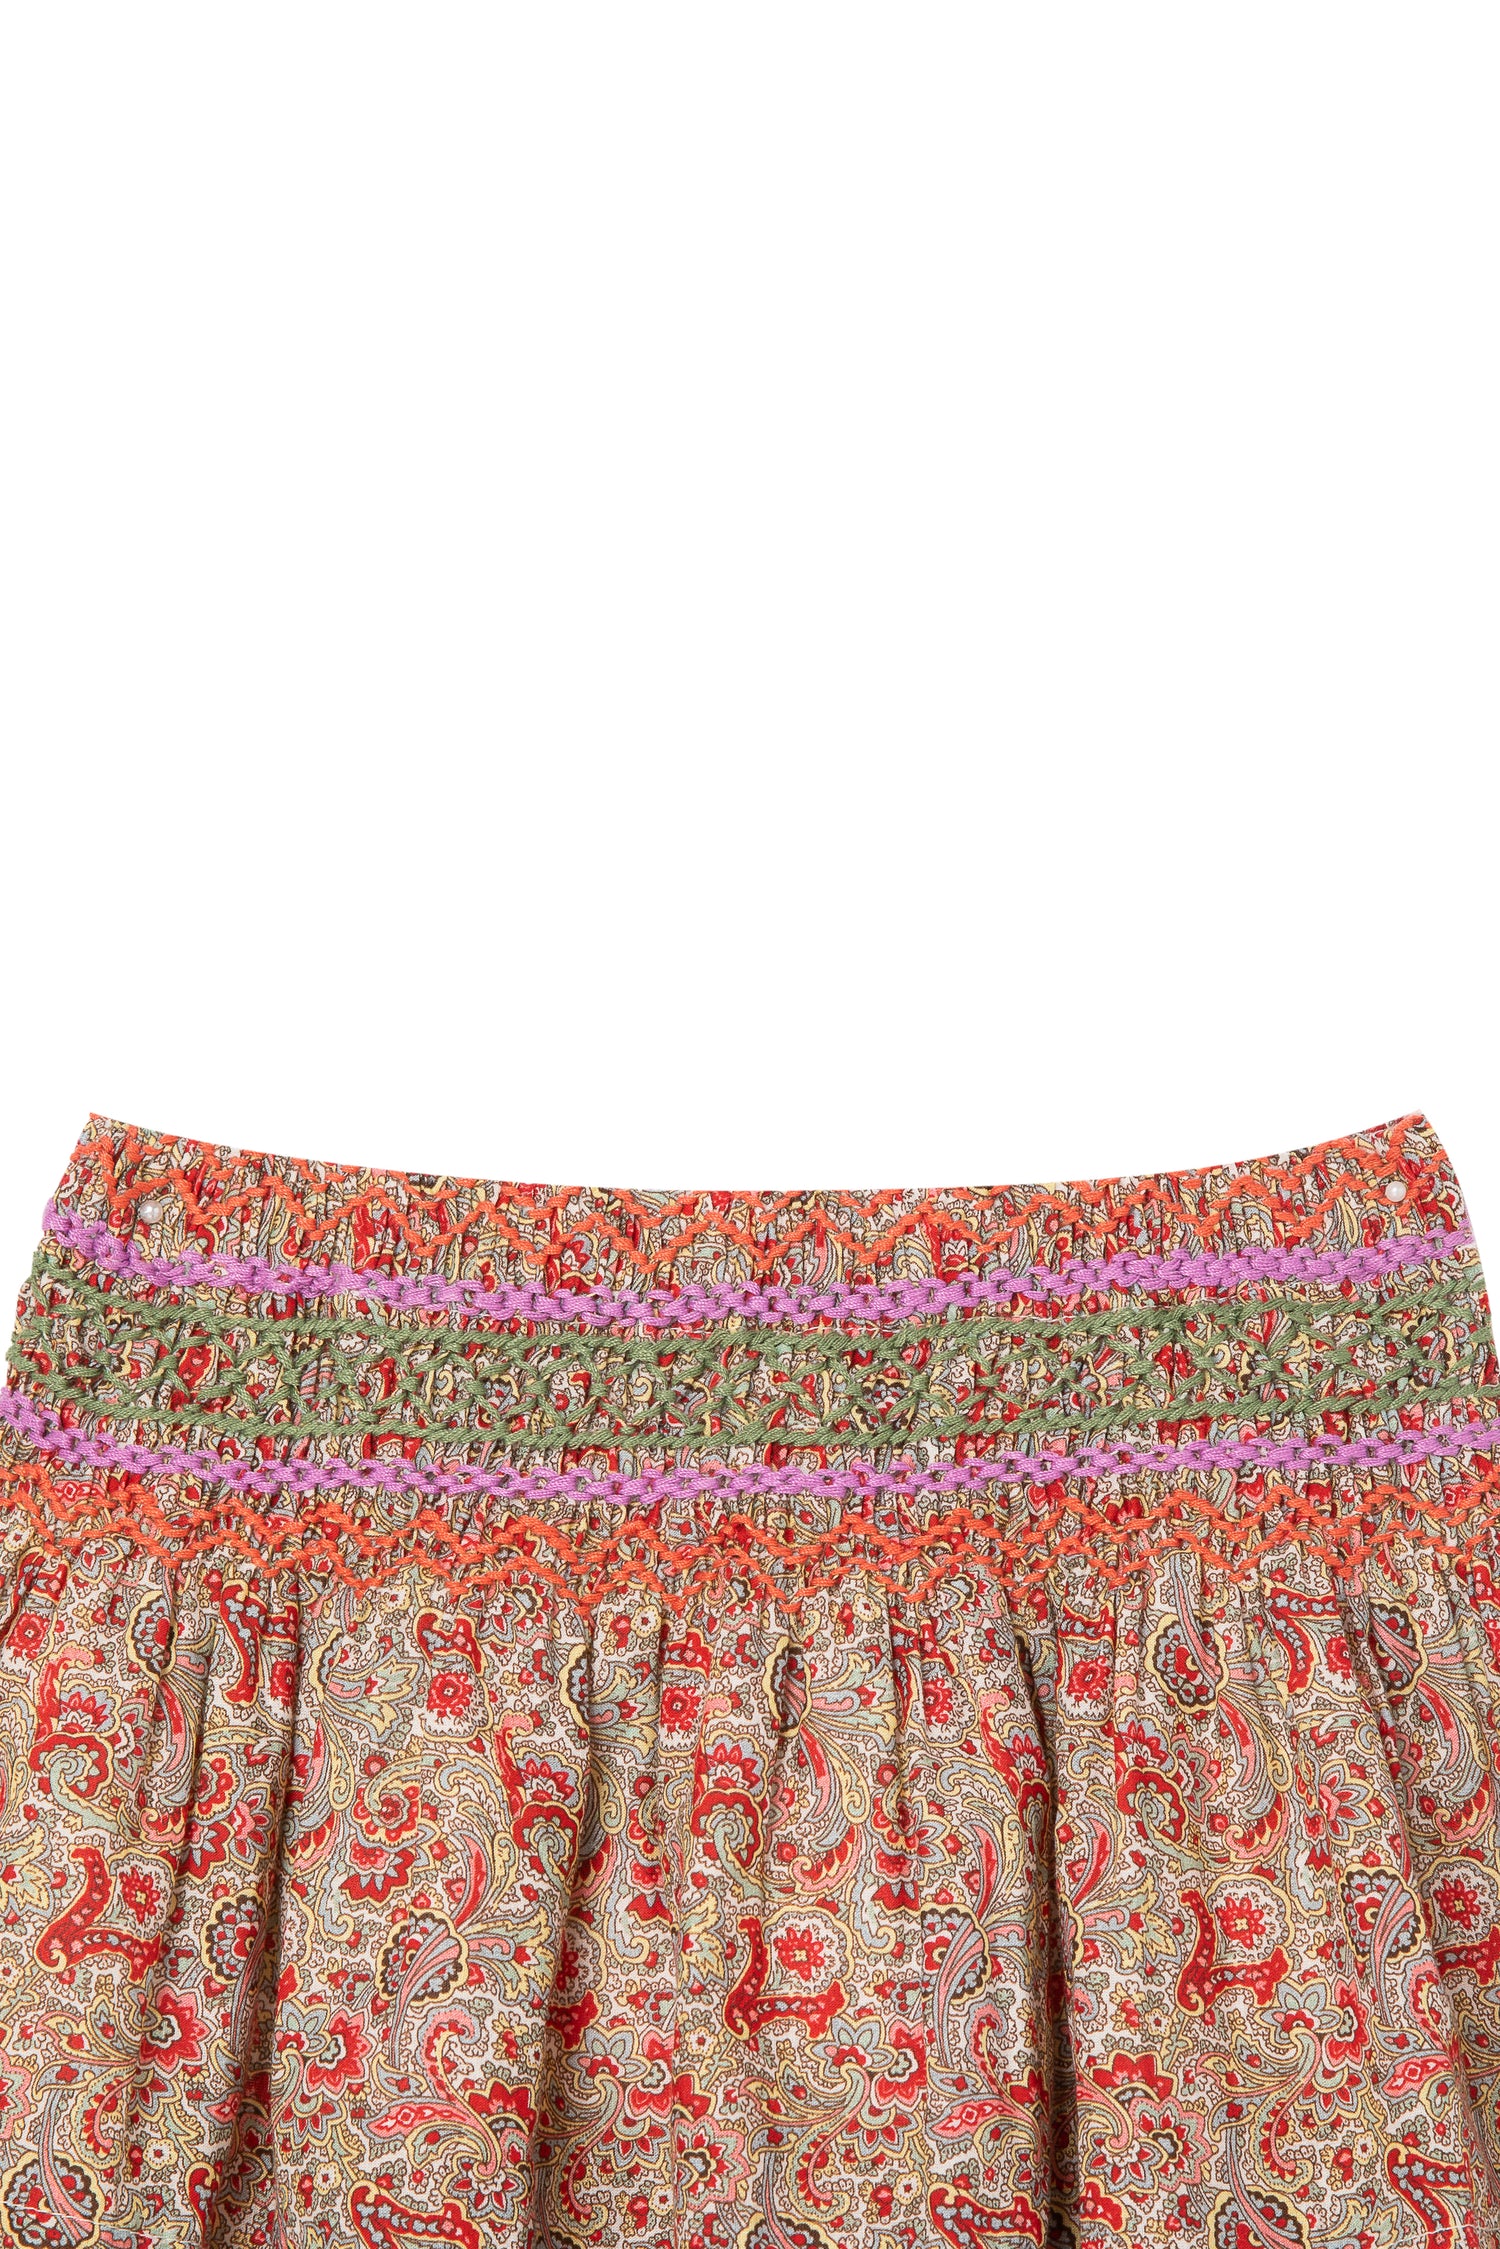 Front view of ruffled multi-colored skirt with red, pink and white 